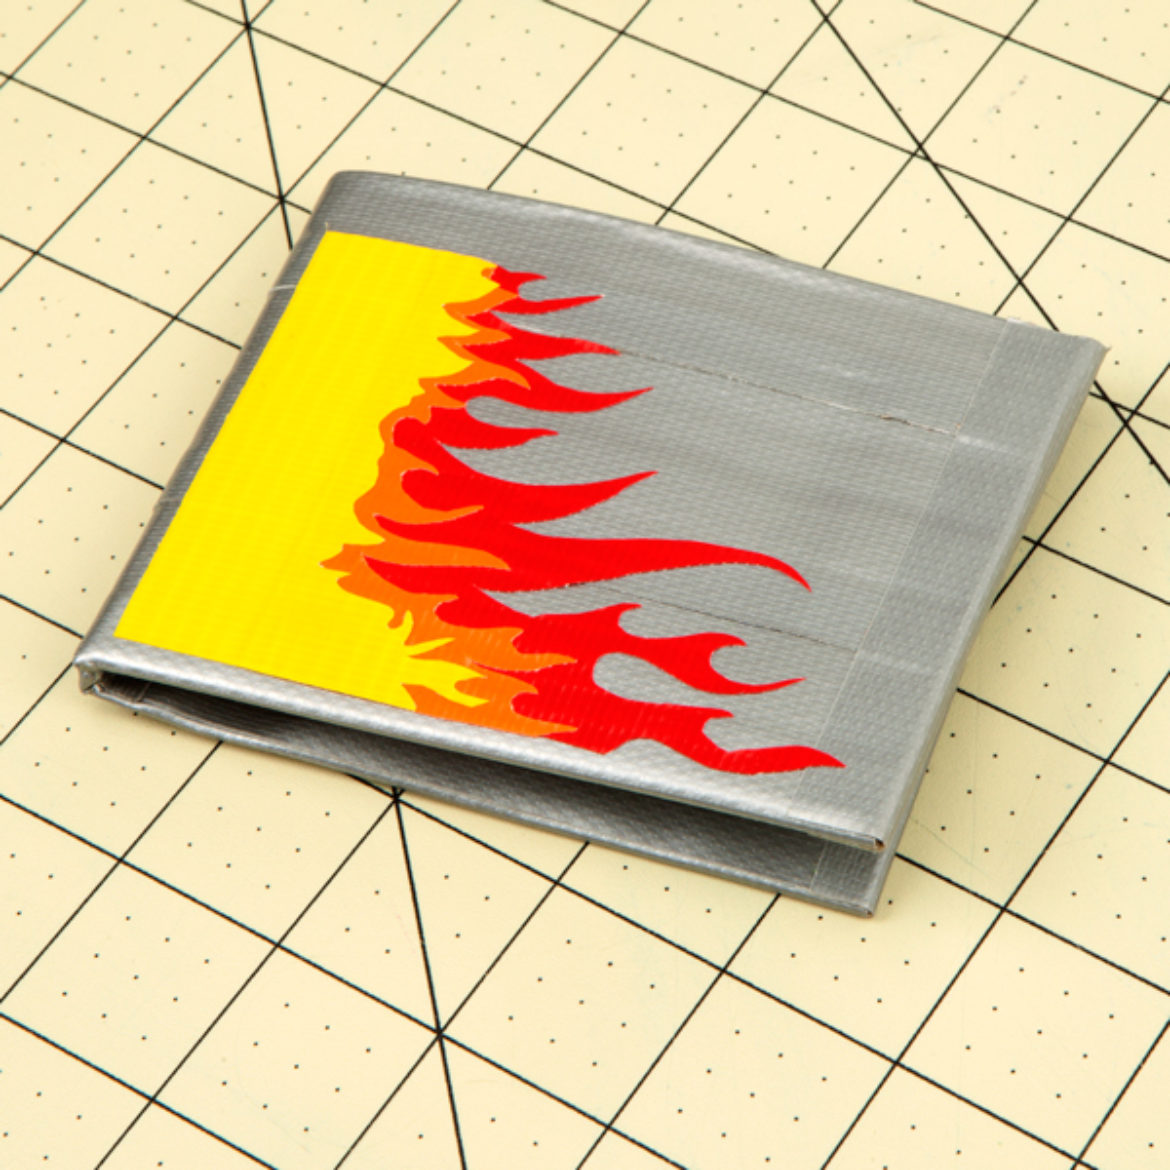 Wallet decorated with multicolored flame shaped pieces of tape